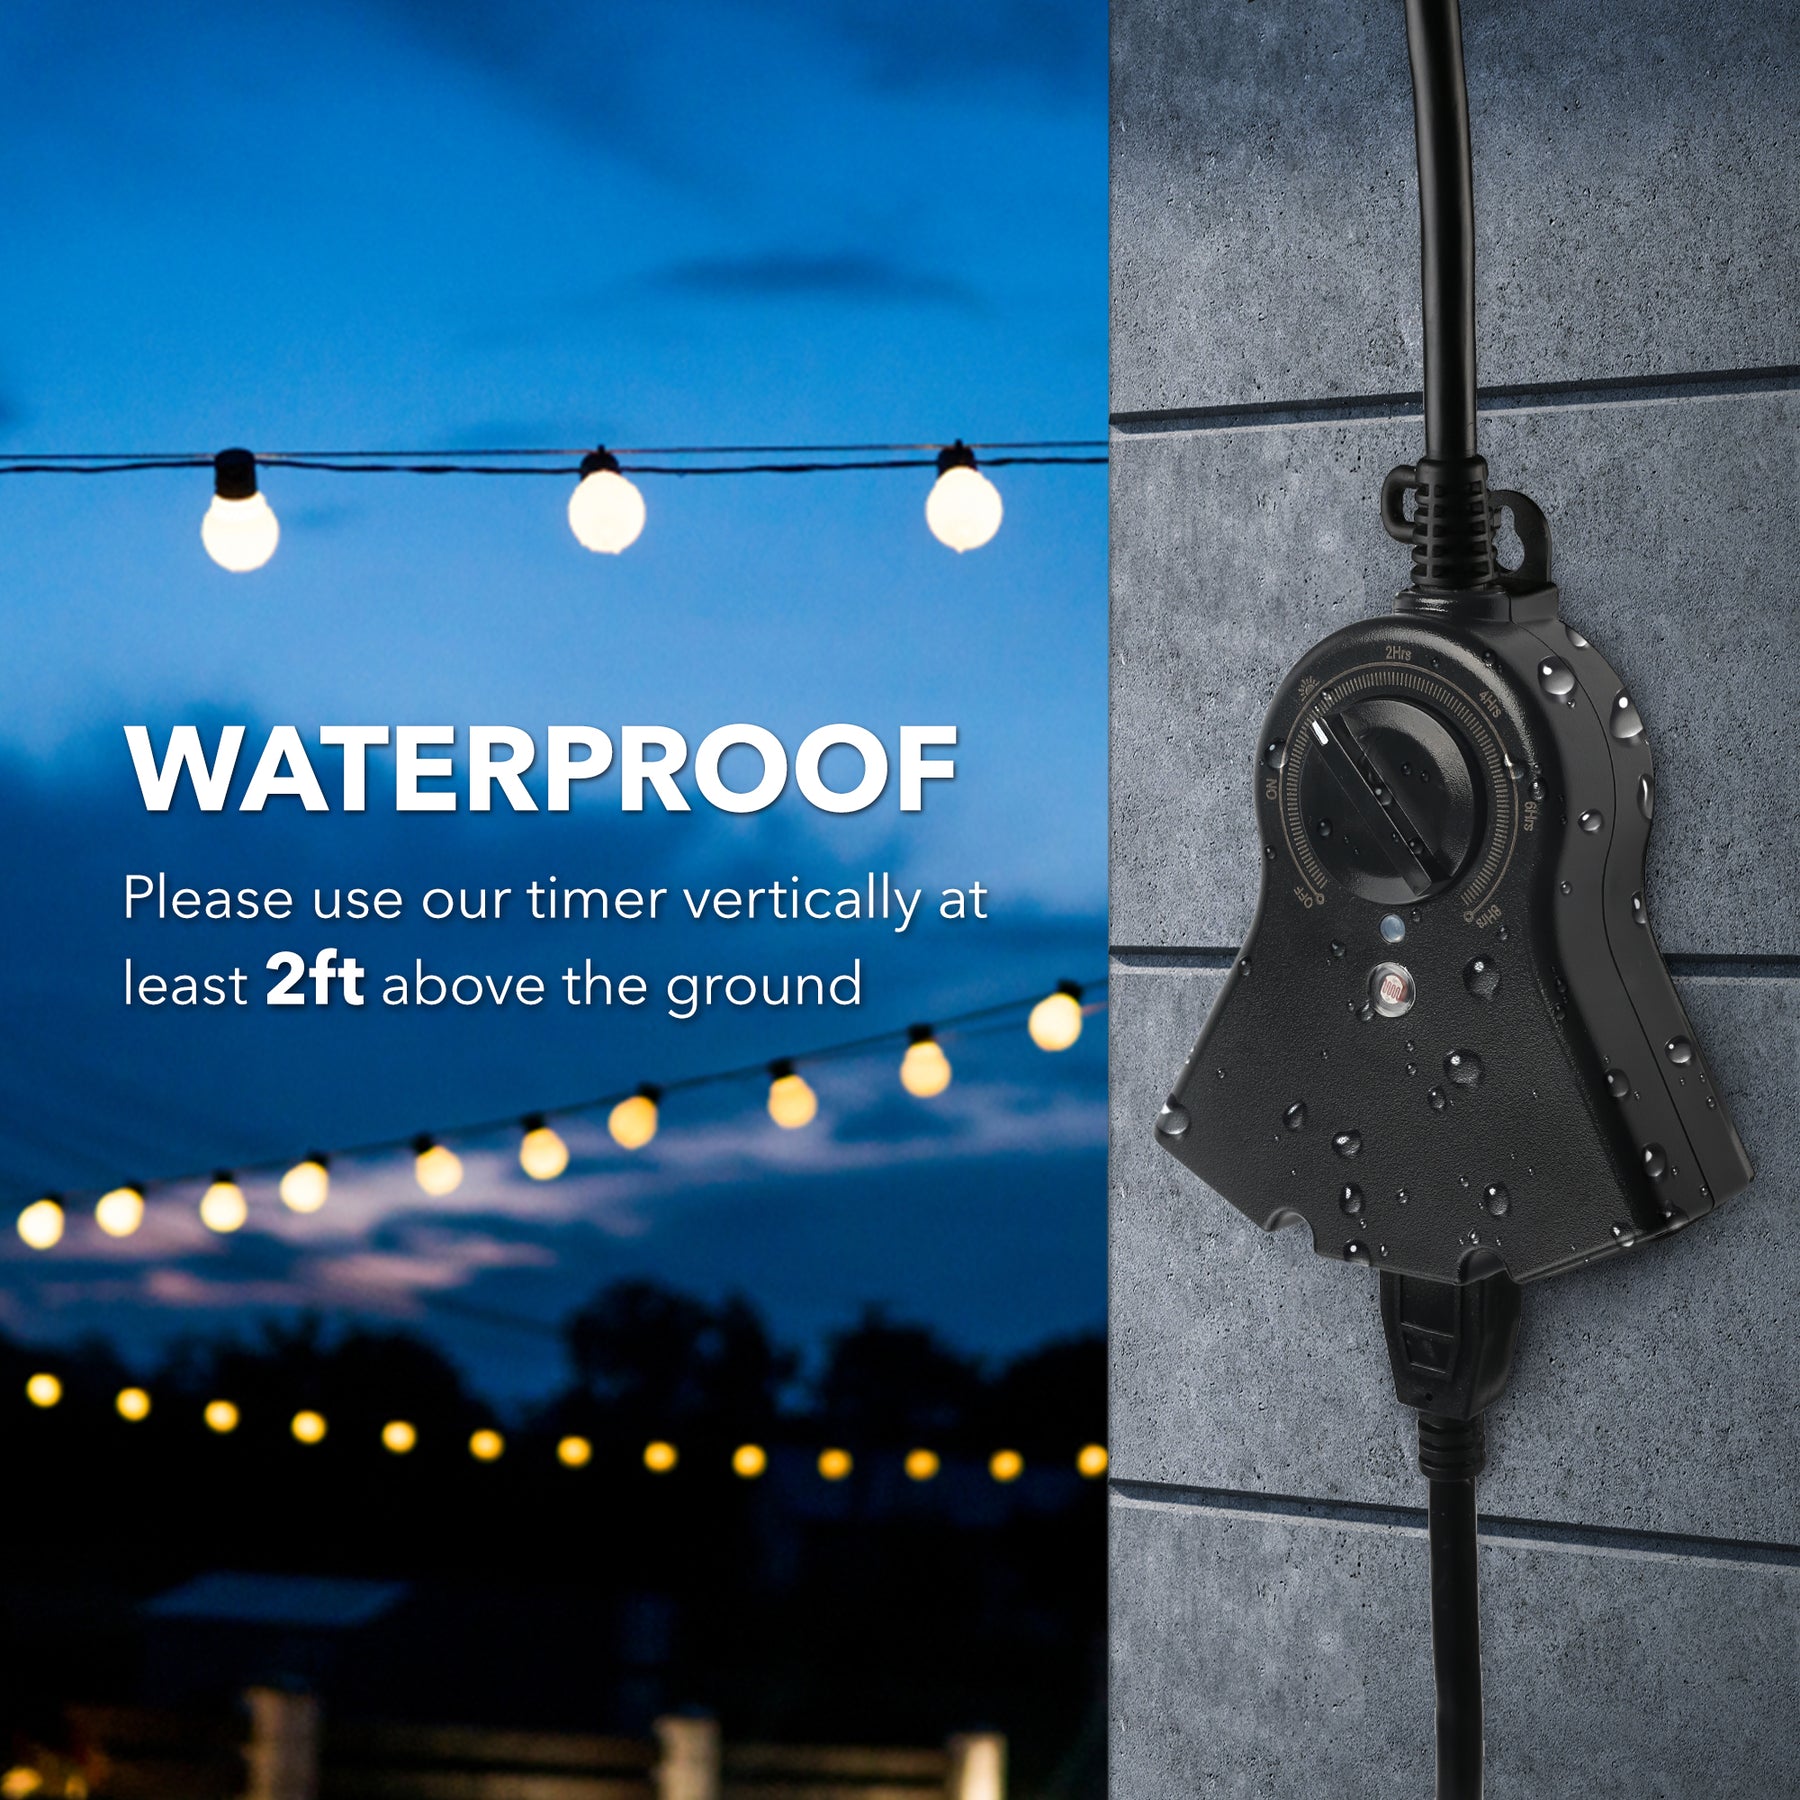 BN-LINK Outdoor 24-Hour Water Resistant Photoelectric Countdown Timer Photocell Light Sensor (2 4 6 or 8 Hours Countdown Mode) 2 Grounded Outlets